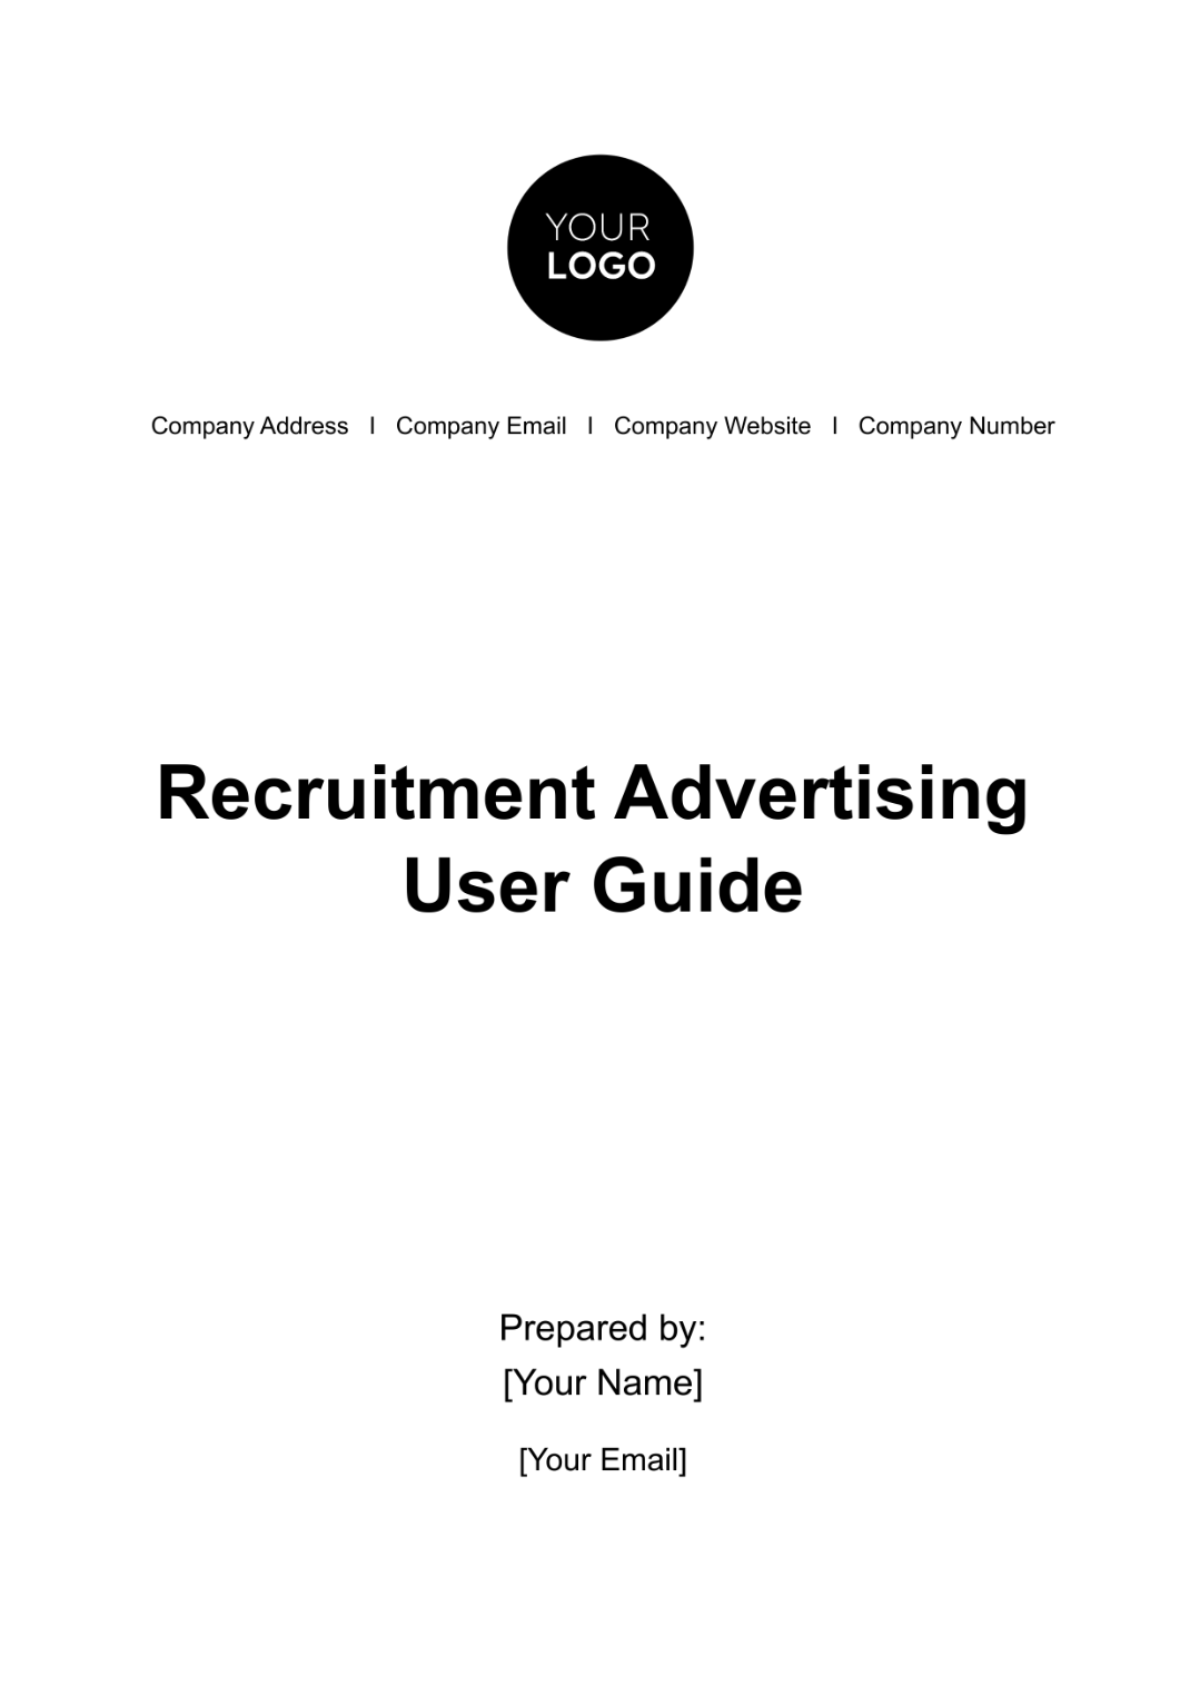 Free Recruitment Advertising User Guide HR Template